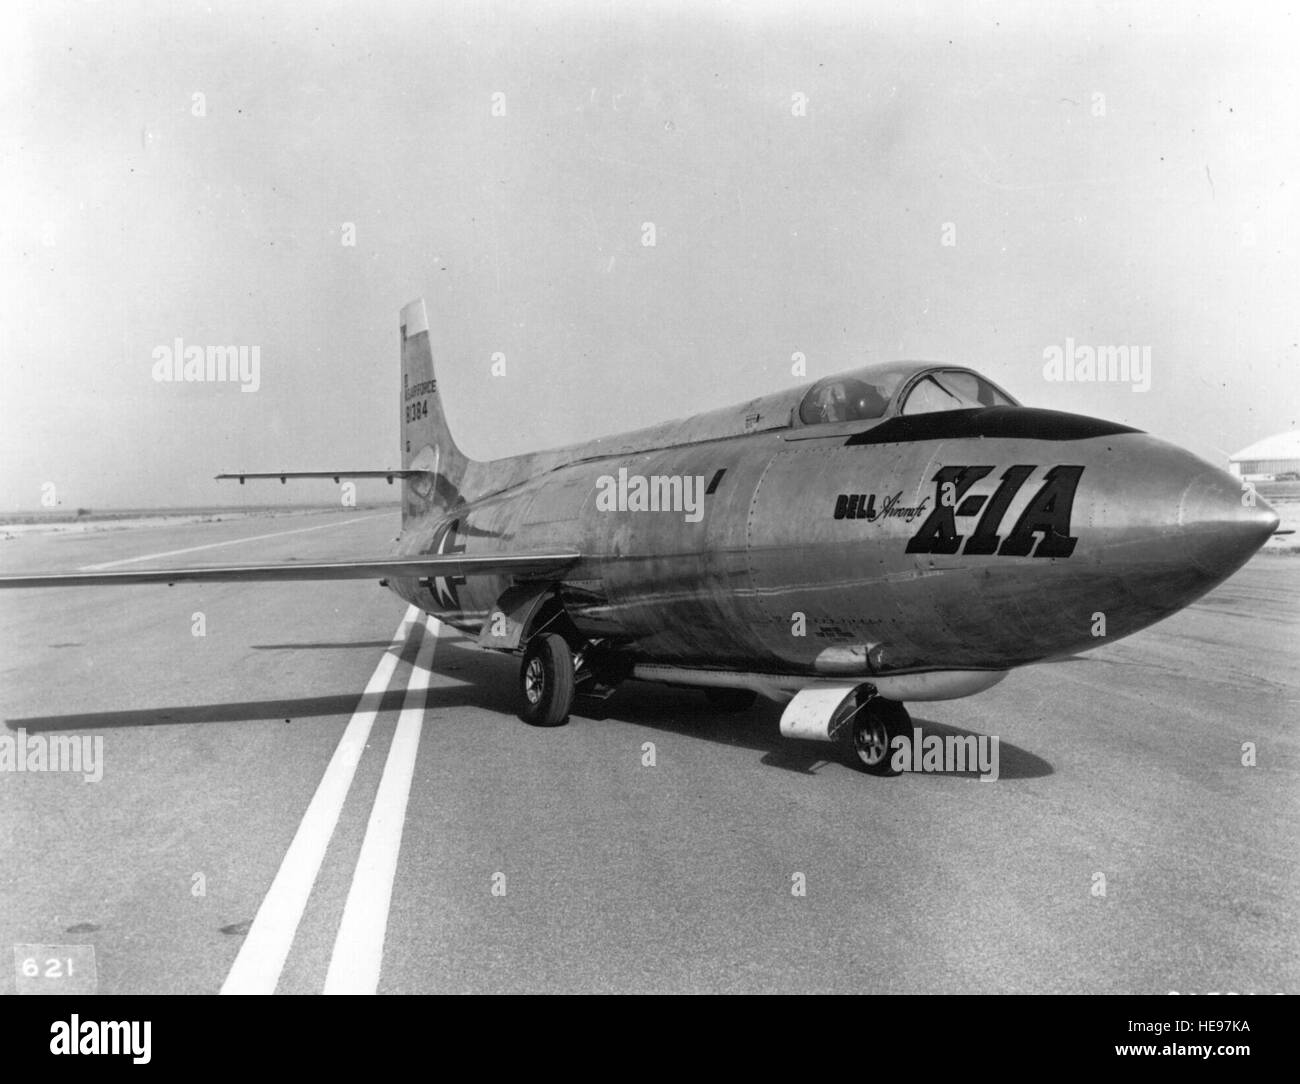 On October 14, 1947, the Bell X-1 became the first airplane tofly faster than the speed of sound. Piloted by U.S. Air Force Capt. Charles E. 'Chuck' Yeager, the X-1 reached a speed of 1,127 kilometers (700 miles) per hour, Mach 1.06, at an altitude of 13,000 meters (43,000 feet). Yeager named the airplane 'Glamorous Glennis' in tribute to his wife. Stock Photo